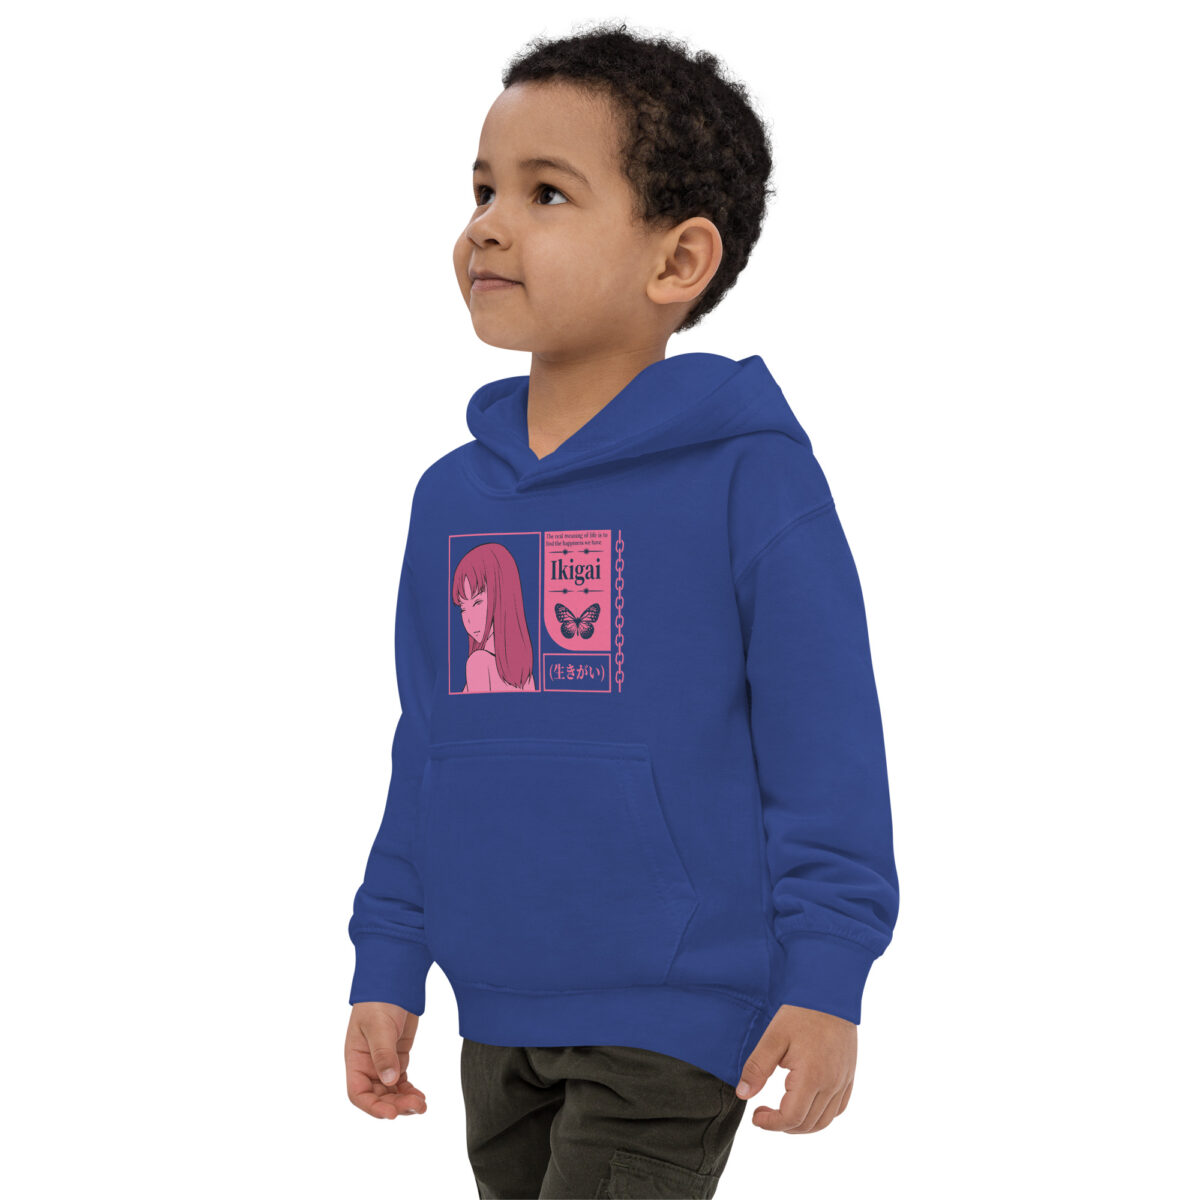 kids hoodie royal blue left front 6475cced23a3e